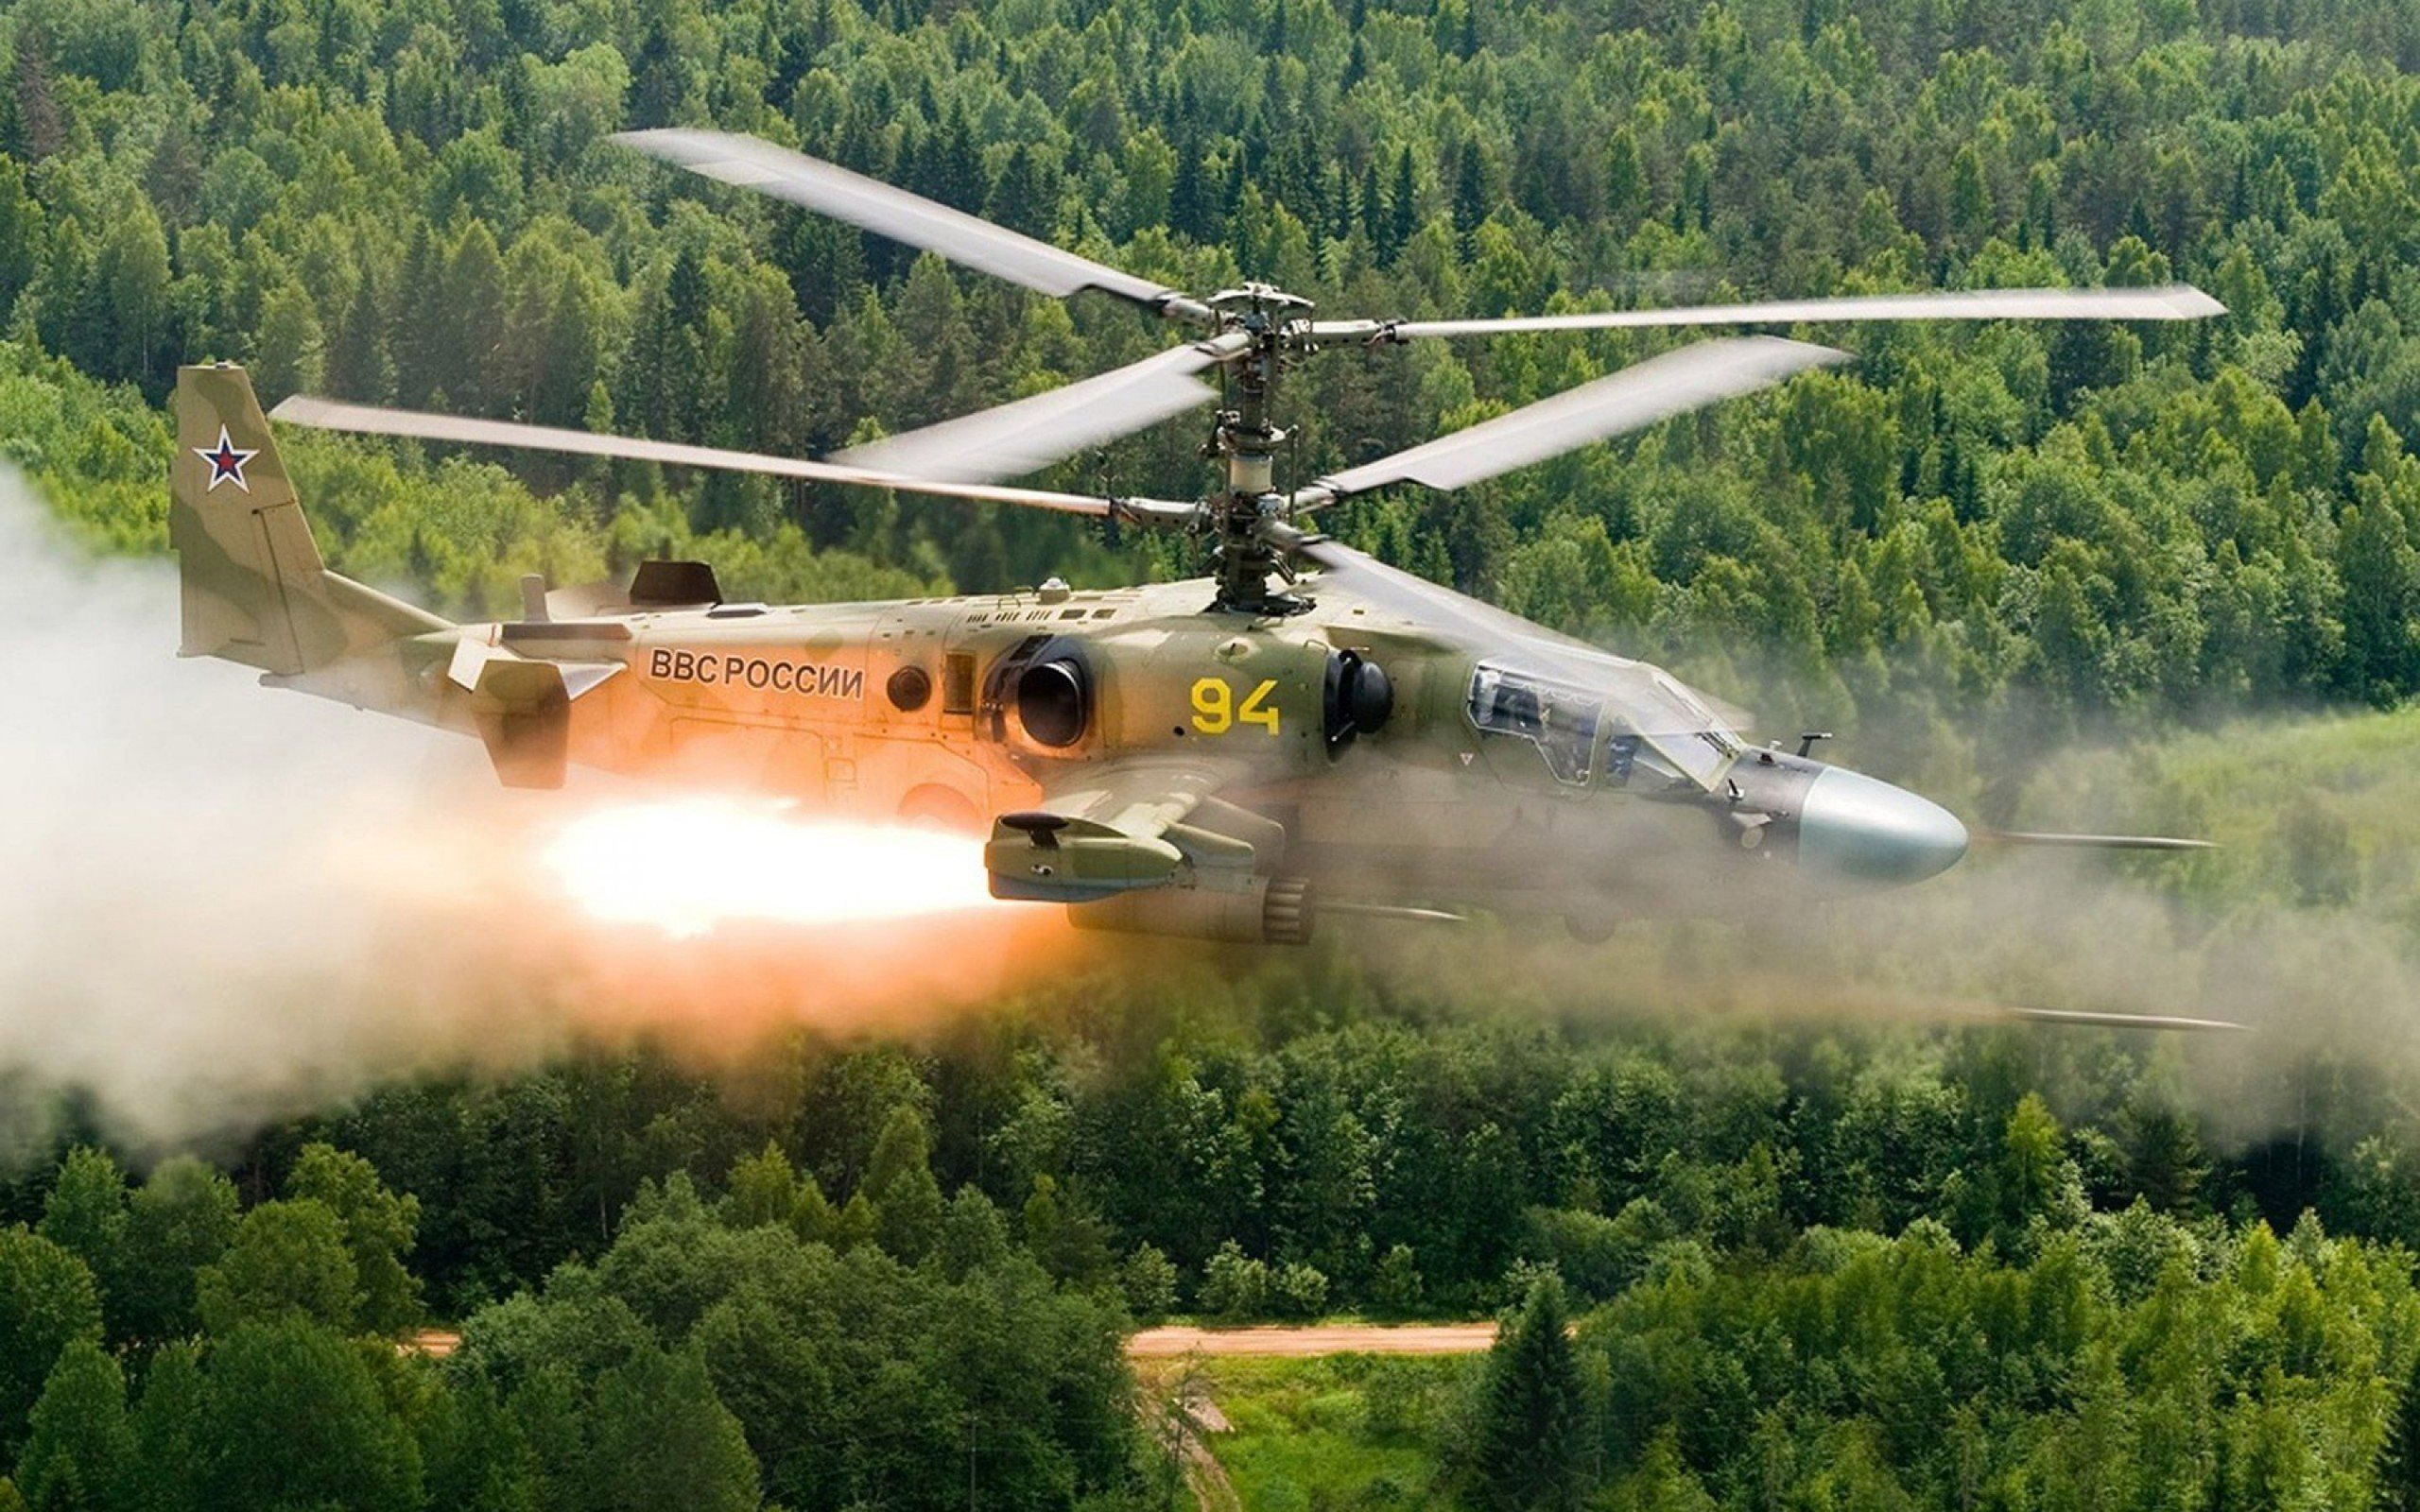 Nice photo of attack helicopter firing missiles